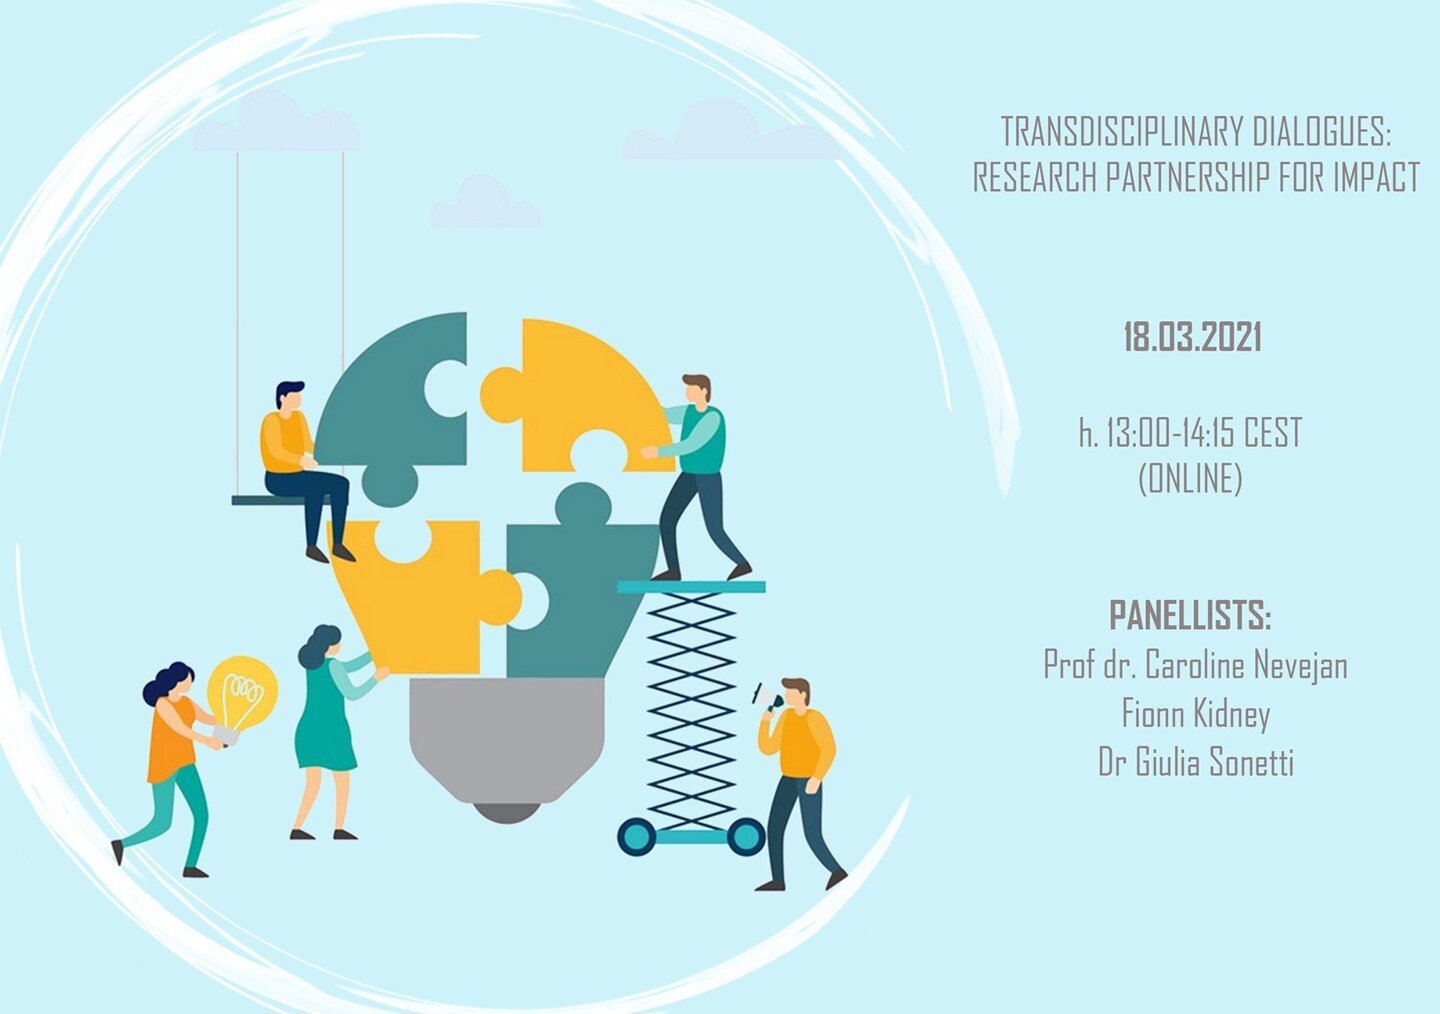 Transdisciplinary Dialogues: Research Partnerships for Impact
📅18.03.2021
🕔h. 13:00-14:15
👉Register here: http://ow.ly/hazX50DOVEN

The webinar will invite EXPERTS engaged in #transdisciplinary work bridging research and society to DISCUSS the imp